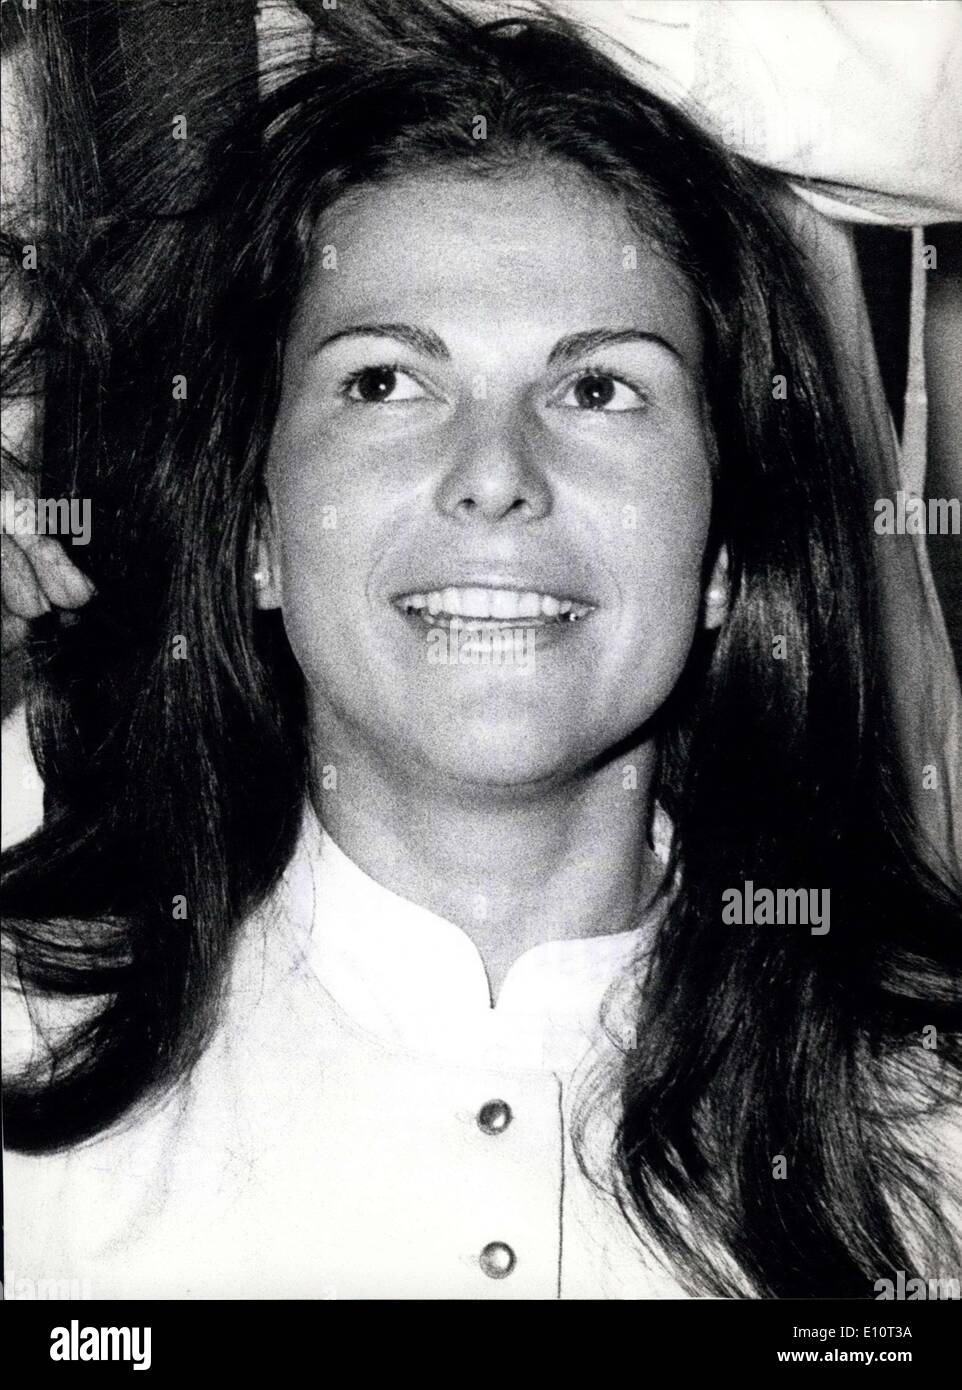 11, 1974 - Willl German girl Silvia Sommerlath become Queen of Sweden?